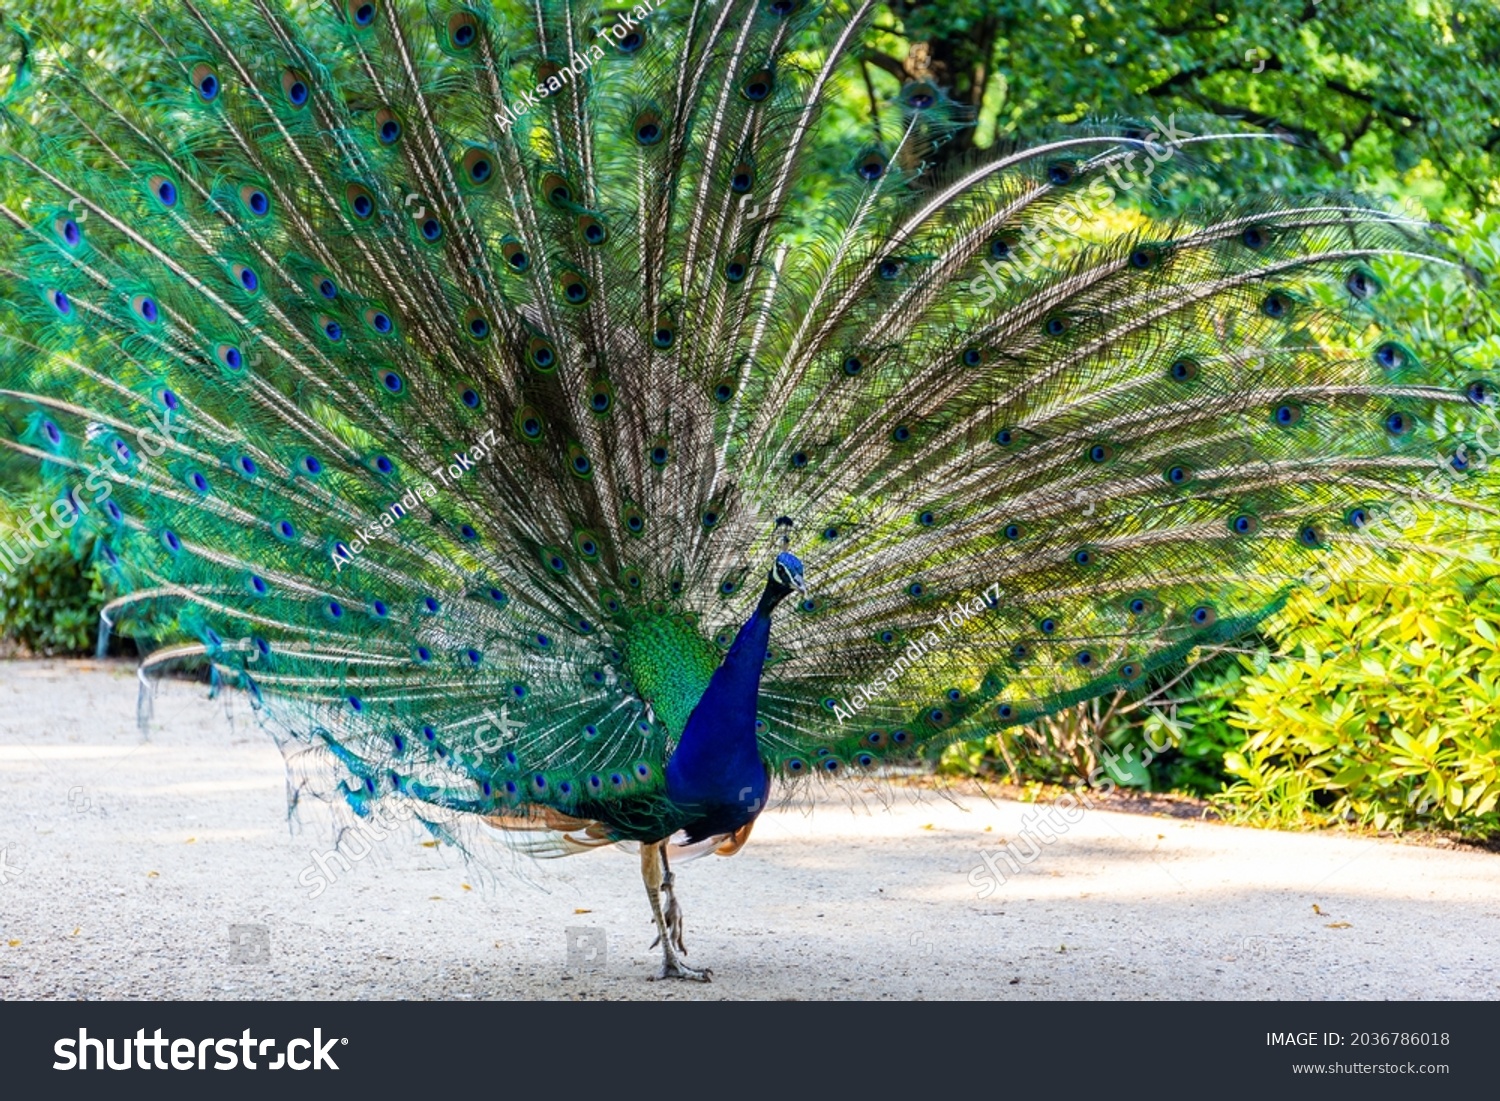 Indian peafowl (Pavo cristatus), known also as Common peafowl or Blue peafowl displaying feathers, colorful peacock bird in Warsaw's Royal Baths Park (Lazienki Krolewskie) in Warsaw, Poland. #2036786018